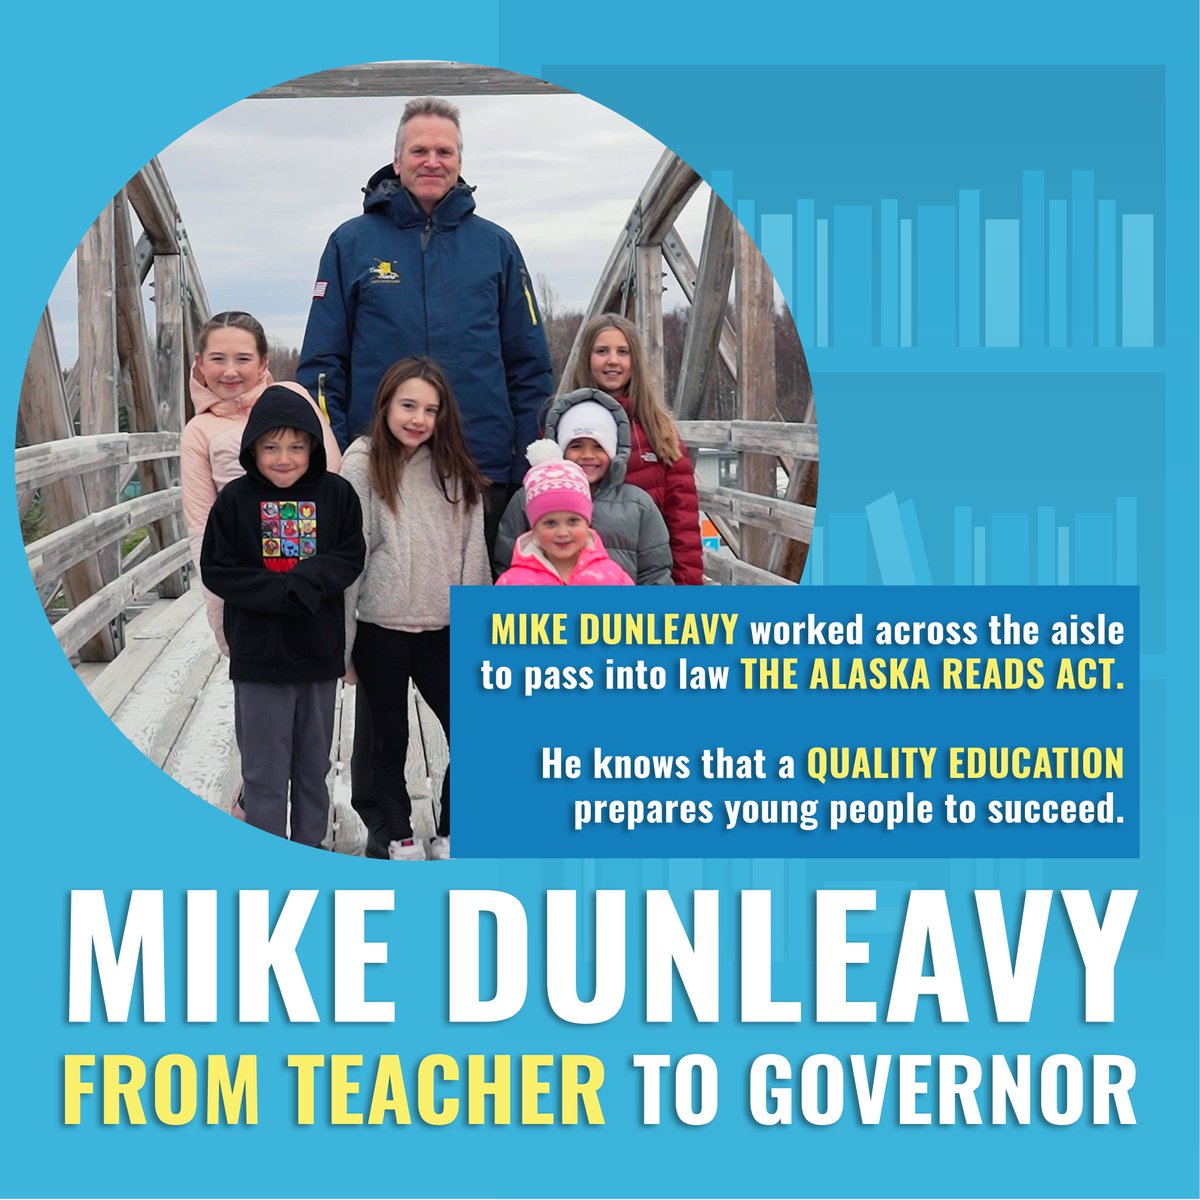 I am the only Alaska Governor to lead a classroom before leading our state. I understand that a quality education prepares young people to succeed, which is why I prioritize children being able to read by third grade.